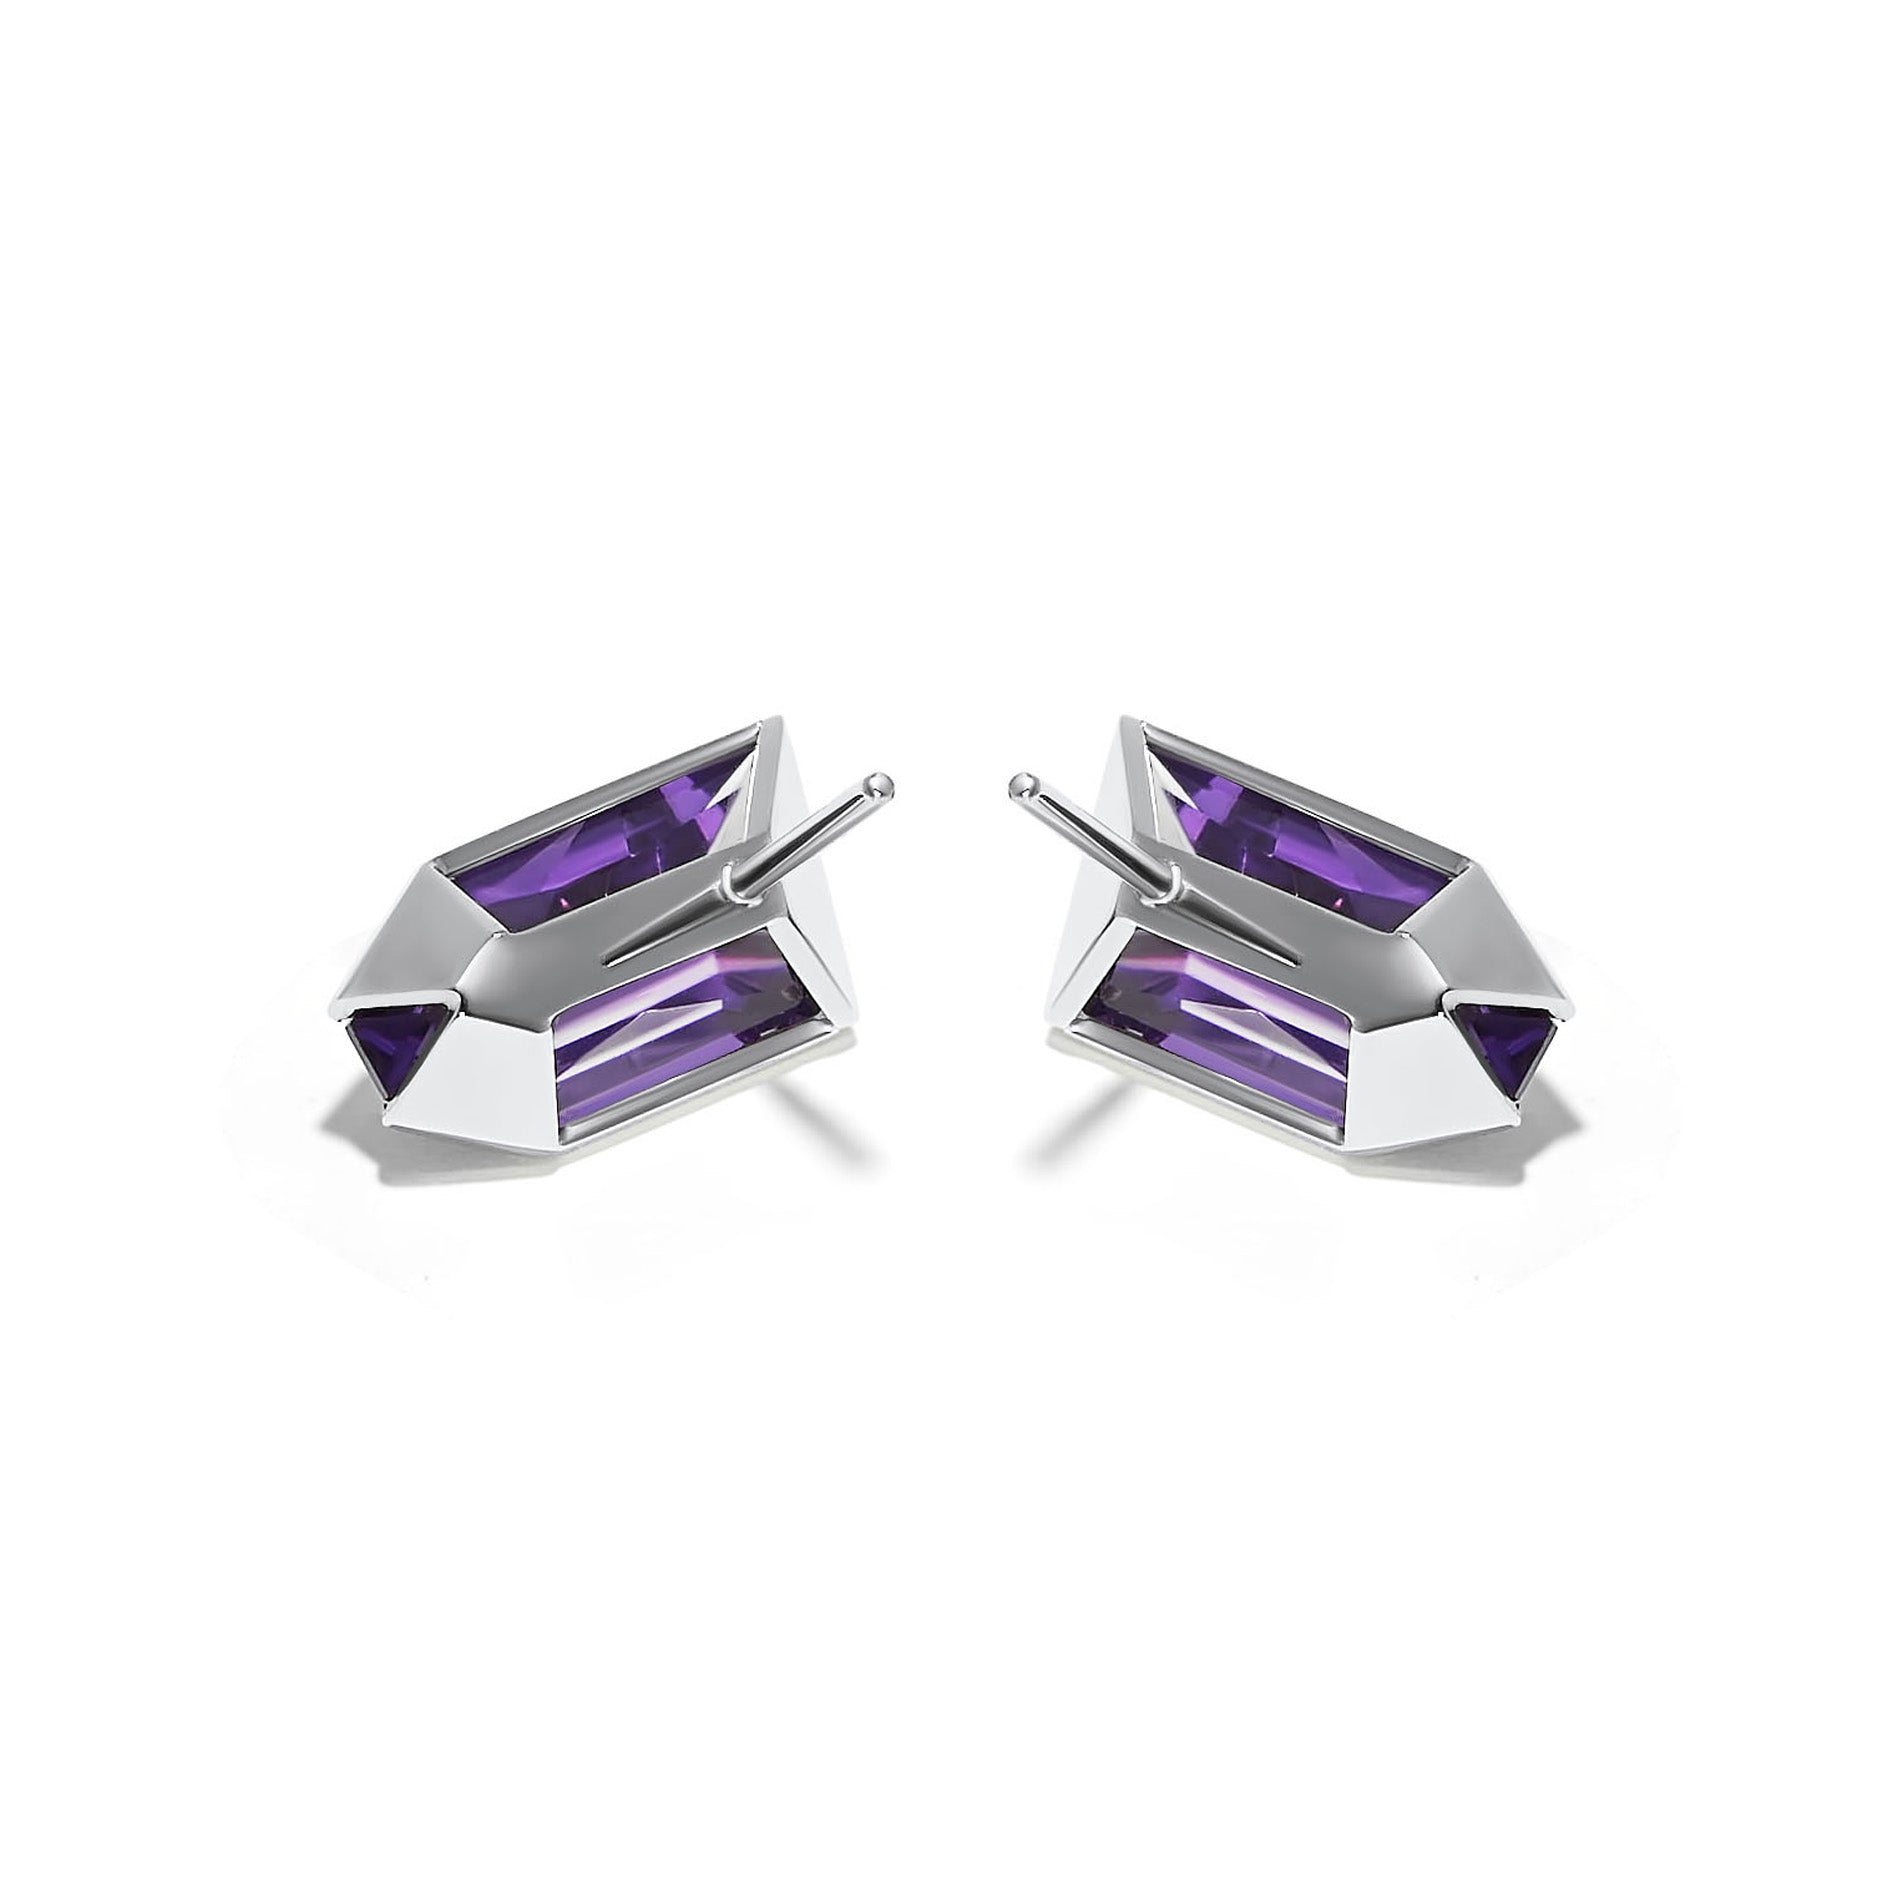 What sets the Airborne Amethyst Earrings apart is their aerodynamic design. The earrings are crafted with a sense of movement and fluidity, reflecting a sleek and graceful aesthetic. The way they hang and catch the light is truly mesmerizing,